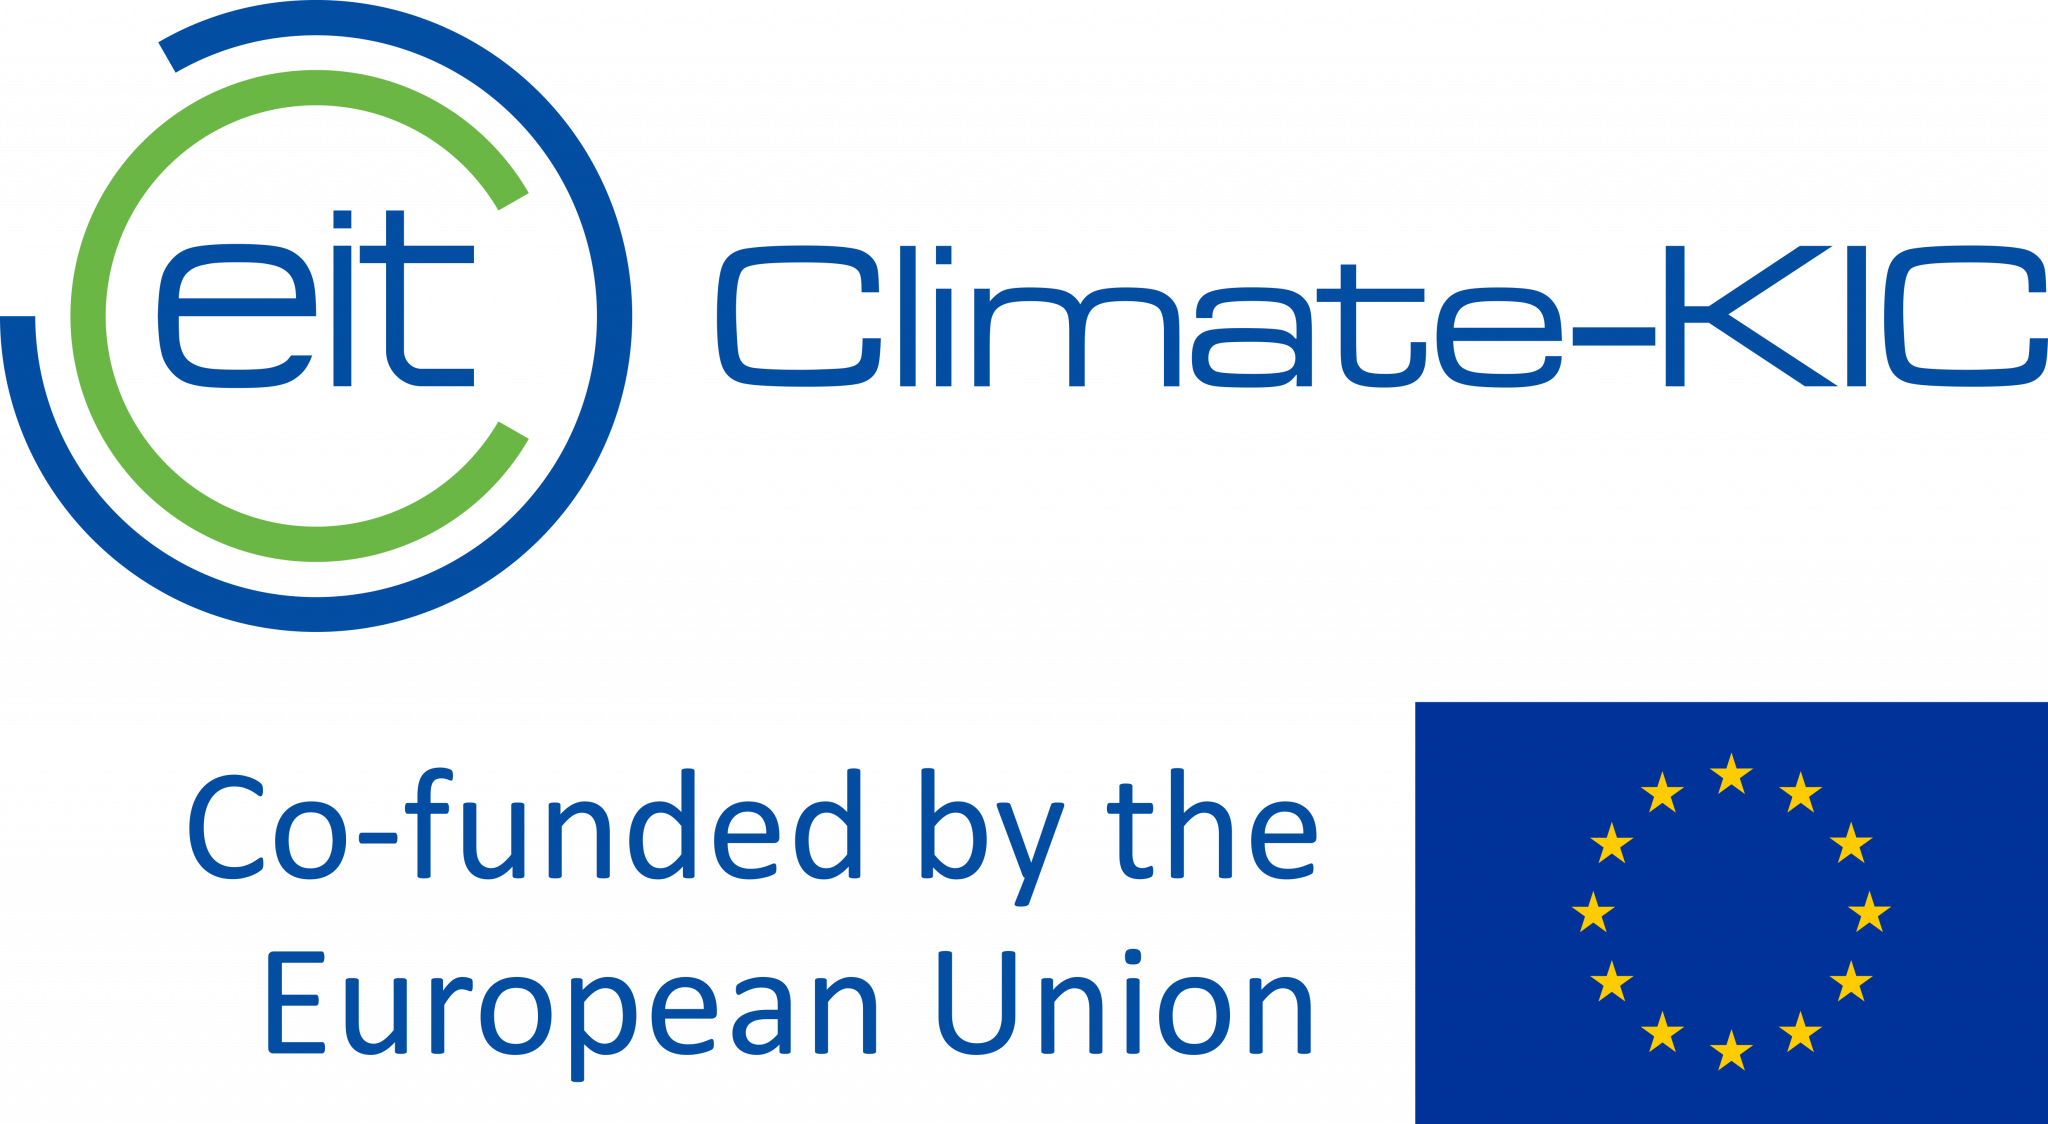 Logo of eIT Climate-KIC, blue and green color, European Union flag on the edge: blue background with twelve yellow stars on it.